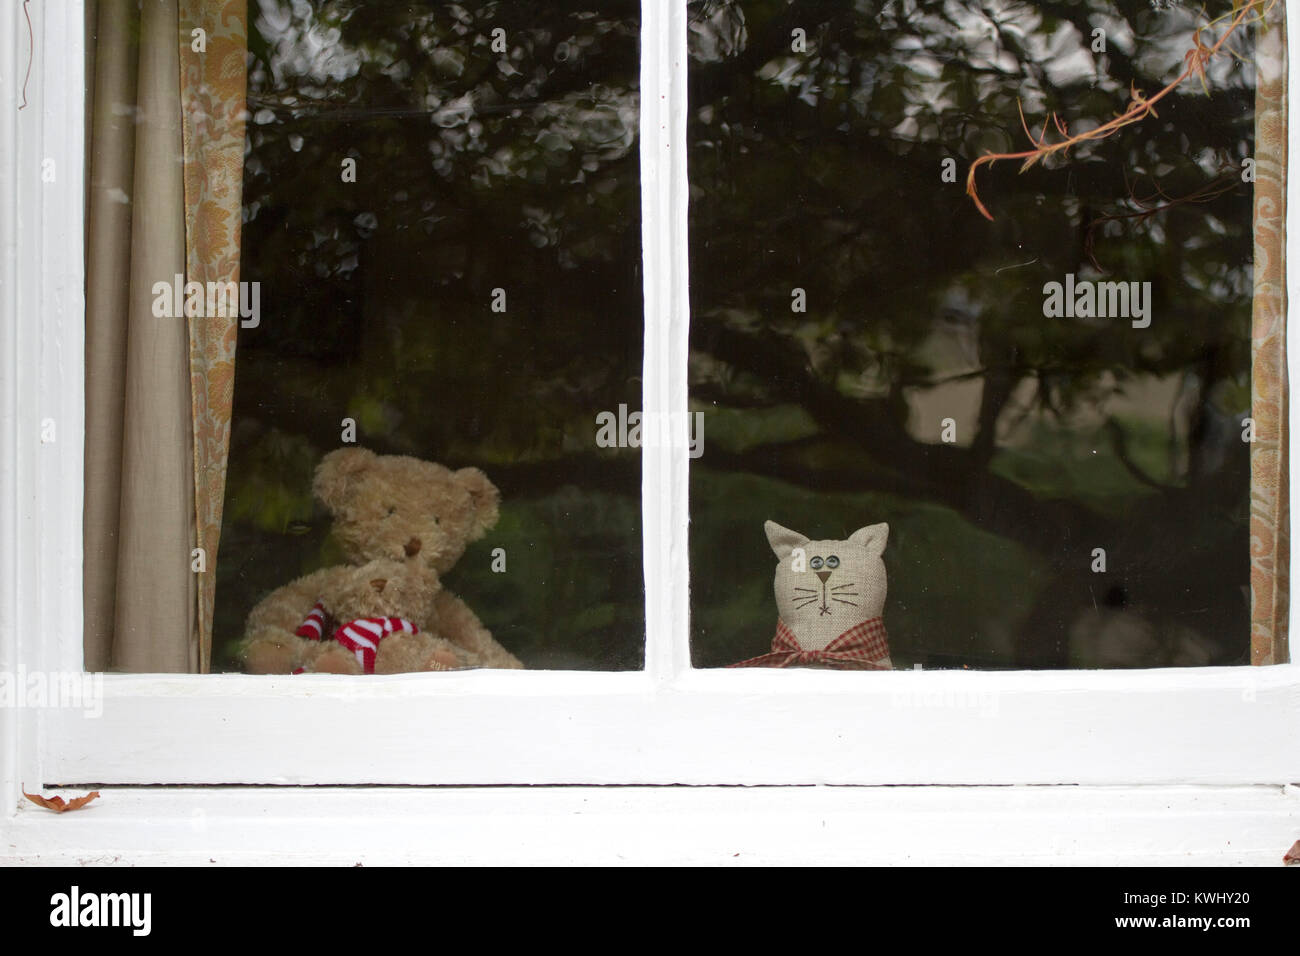 A teddy bear and a soft toy cat look out of a sash window Stock Photo